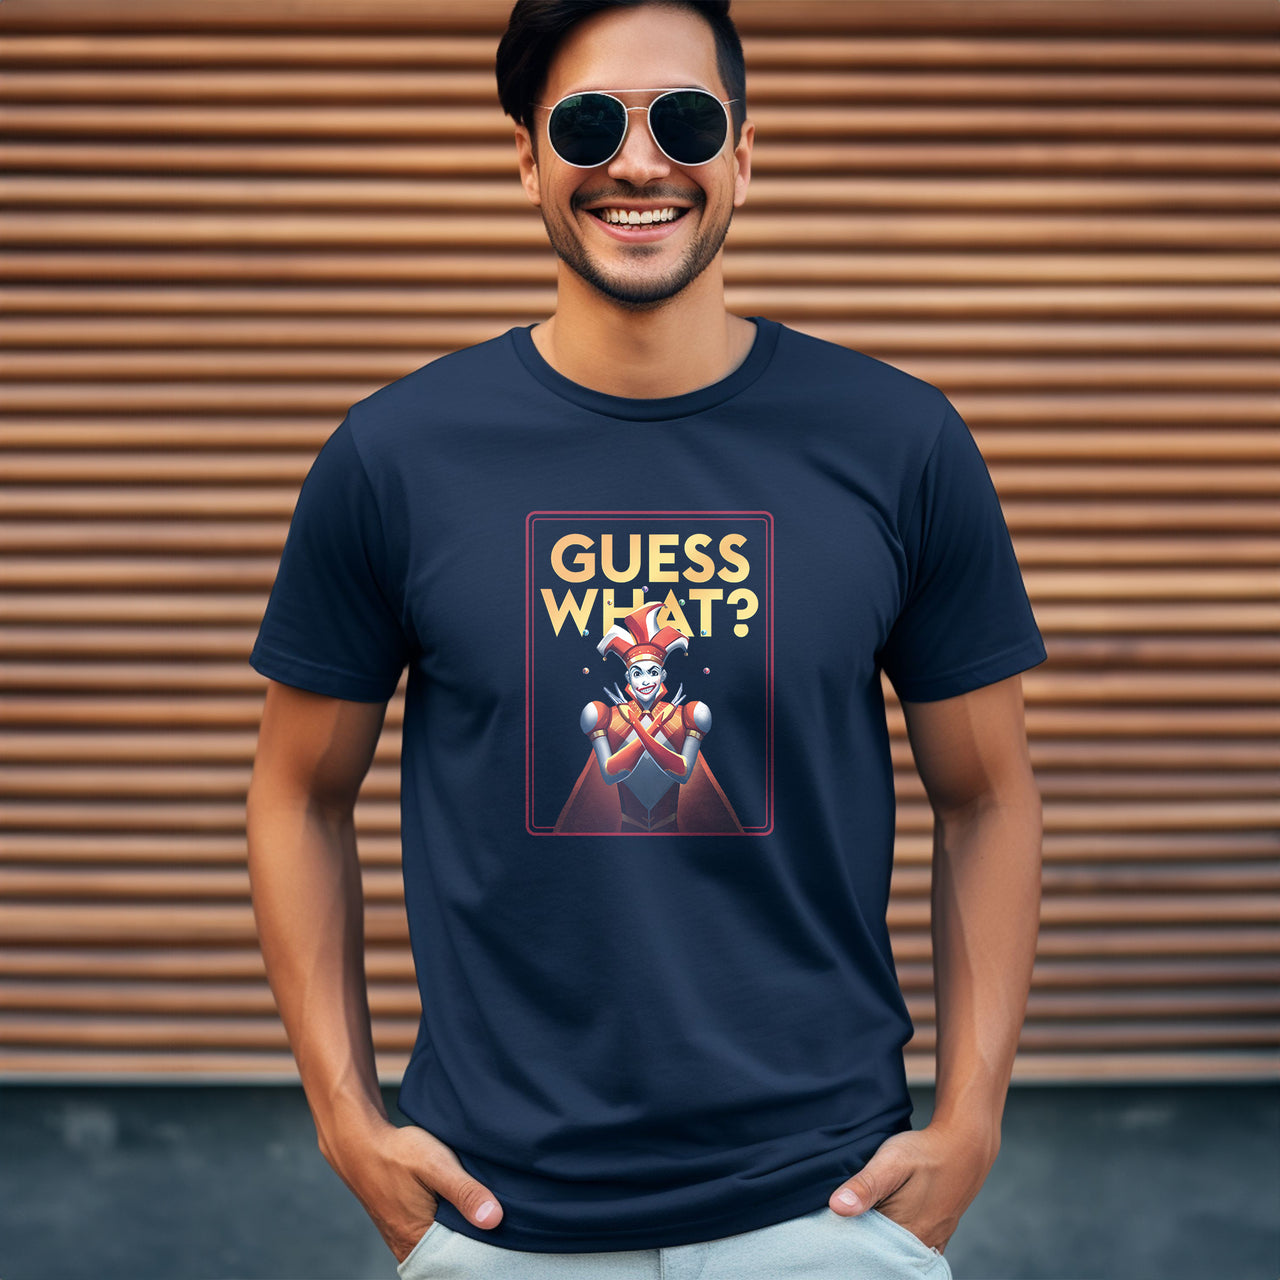 Guess What T-shirt